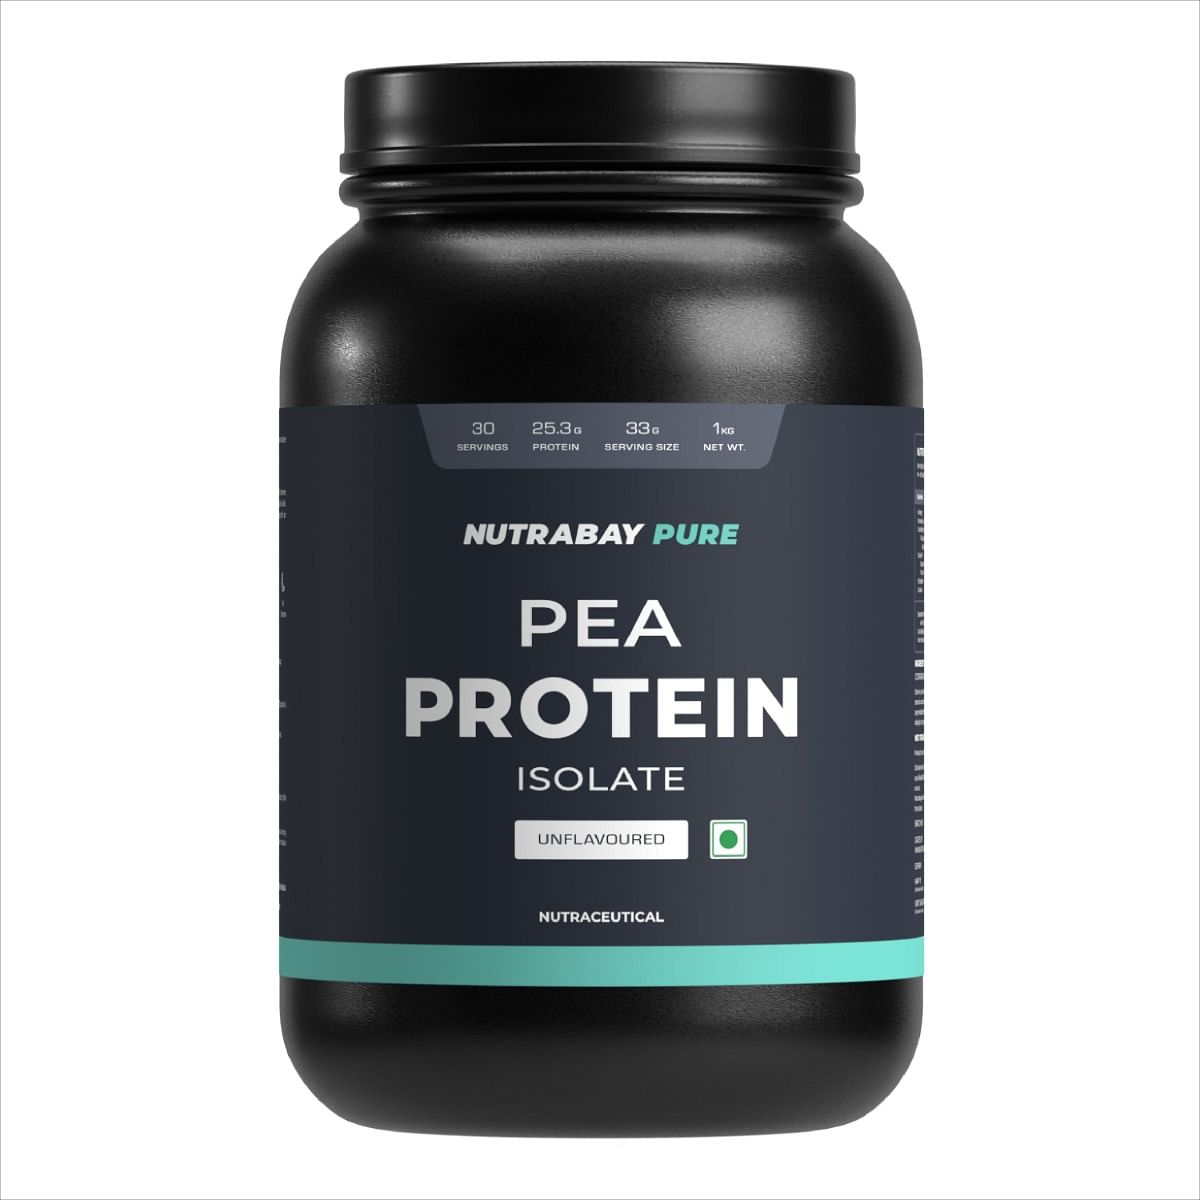 Nutrabay Pure Pea Protein Isolate 1kg  30 Servings  25.3g Protein  Unflavoured  Build Muscle  Fast Recovery